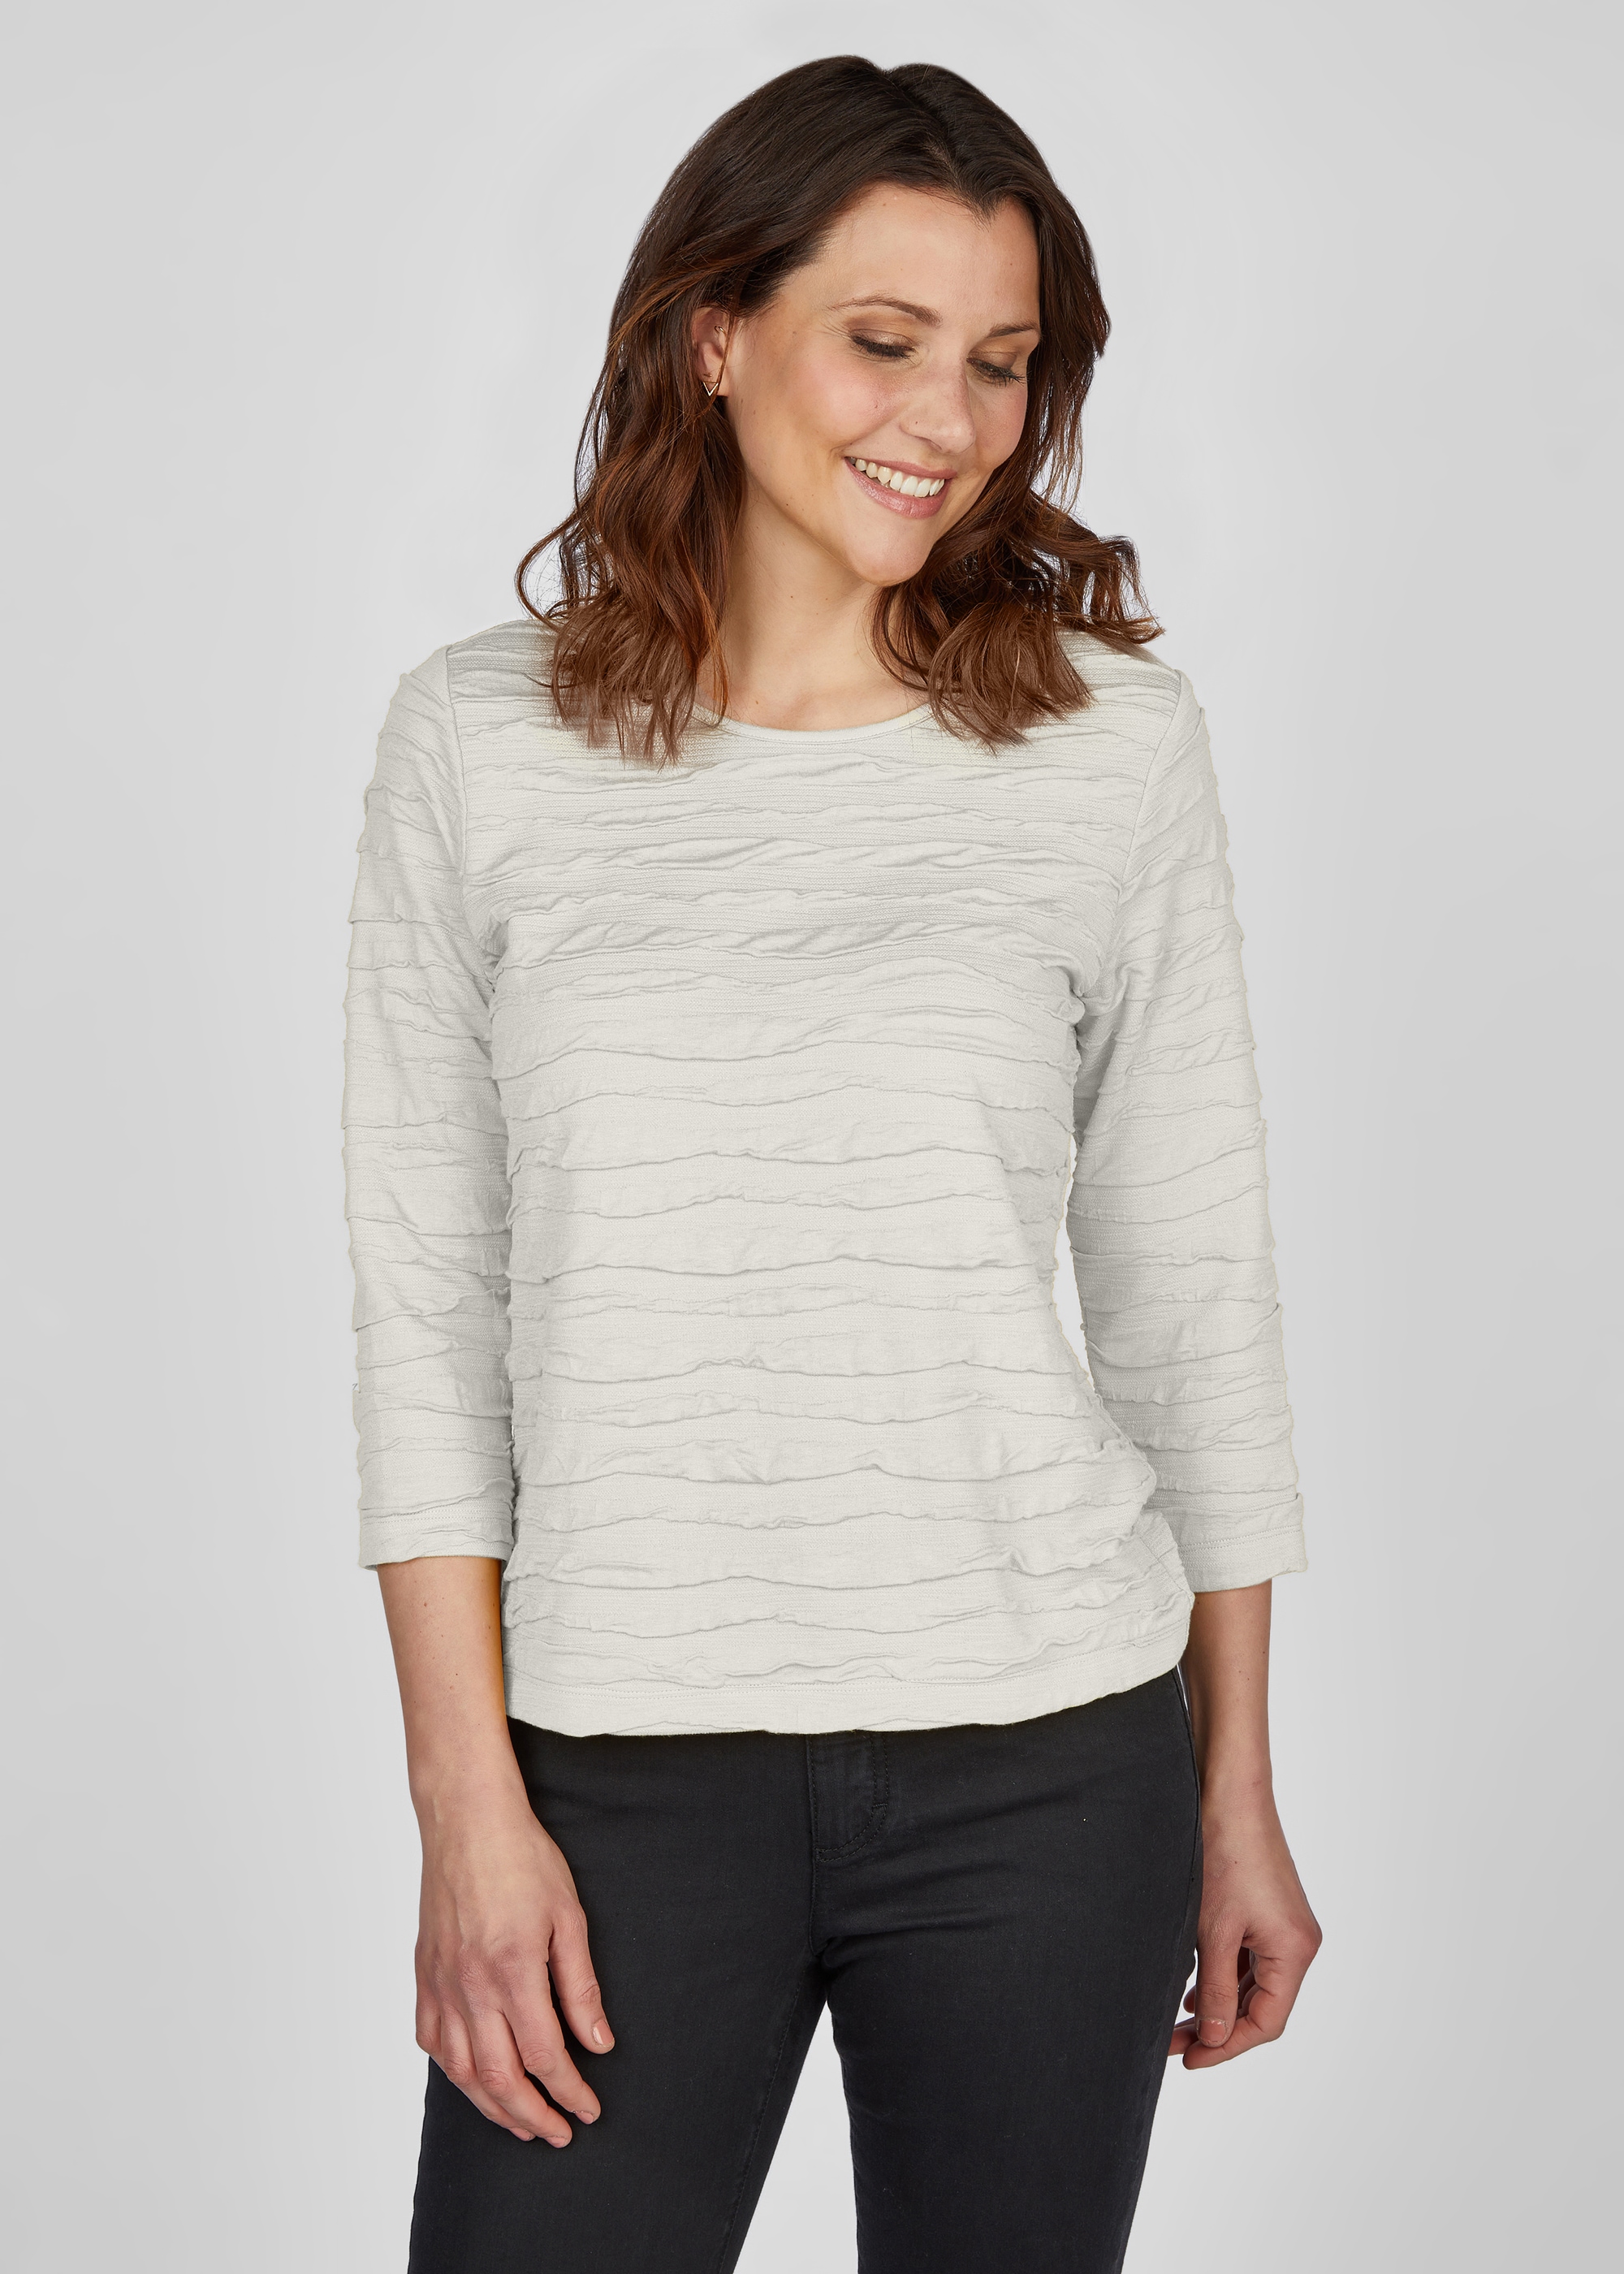 Rabe ♕ bei 3/4-Arm-Shirt, in Unifarbe